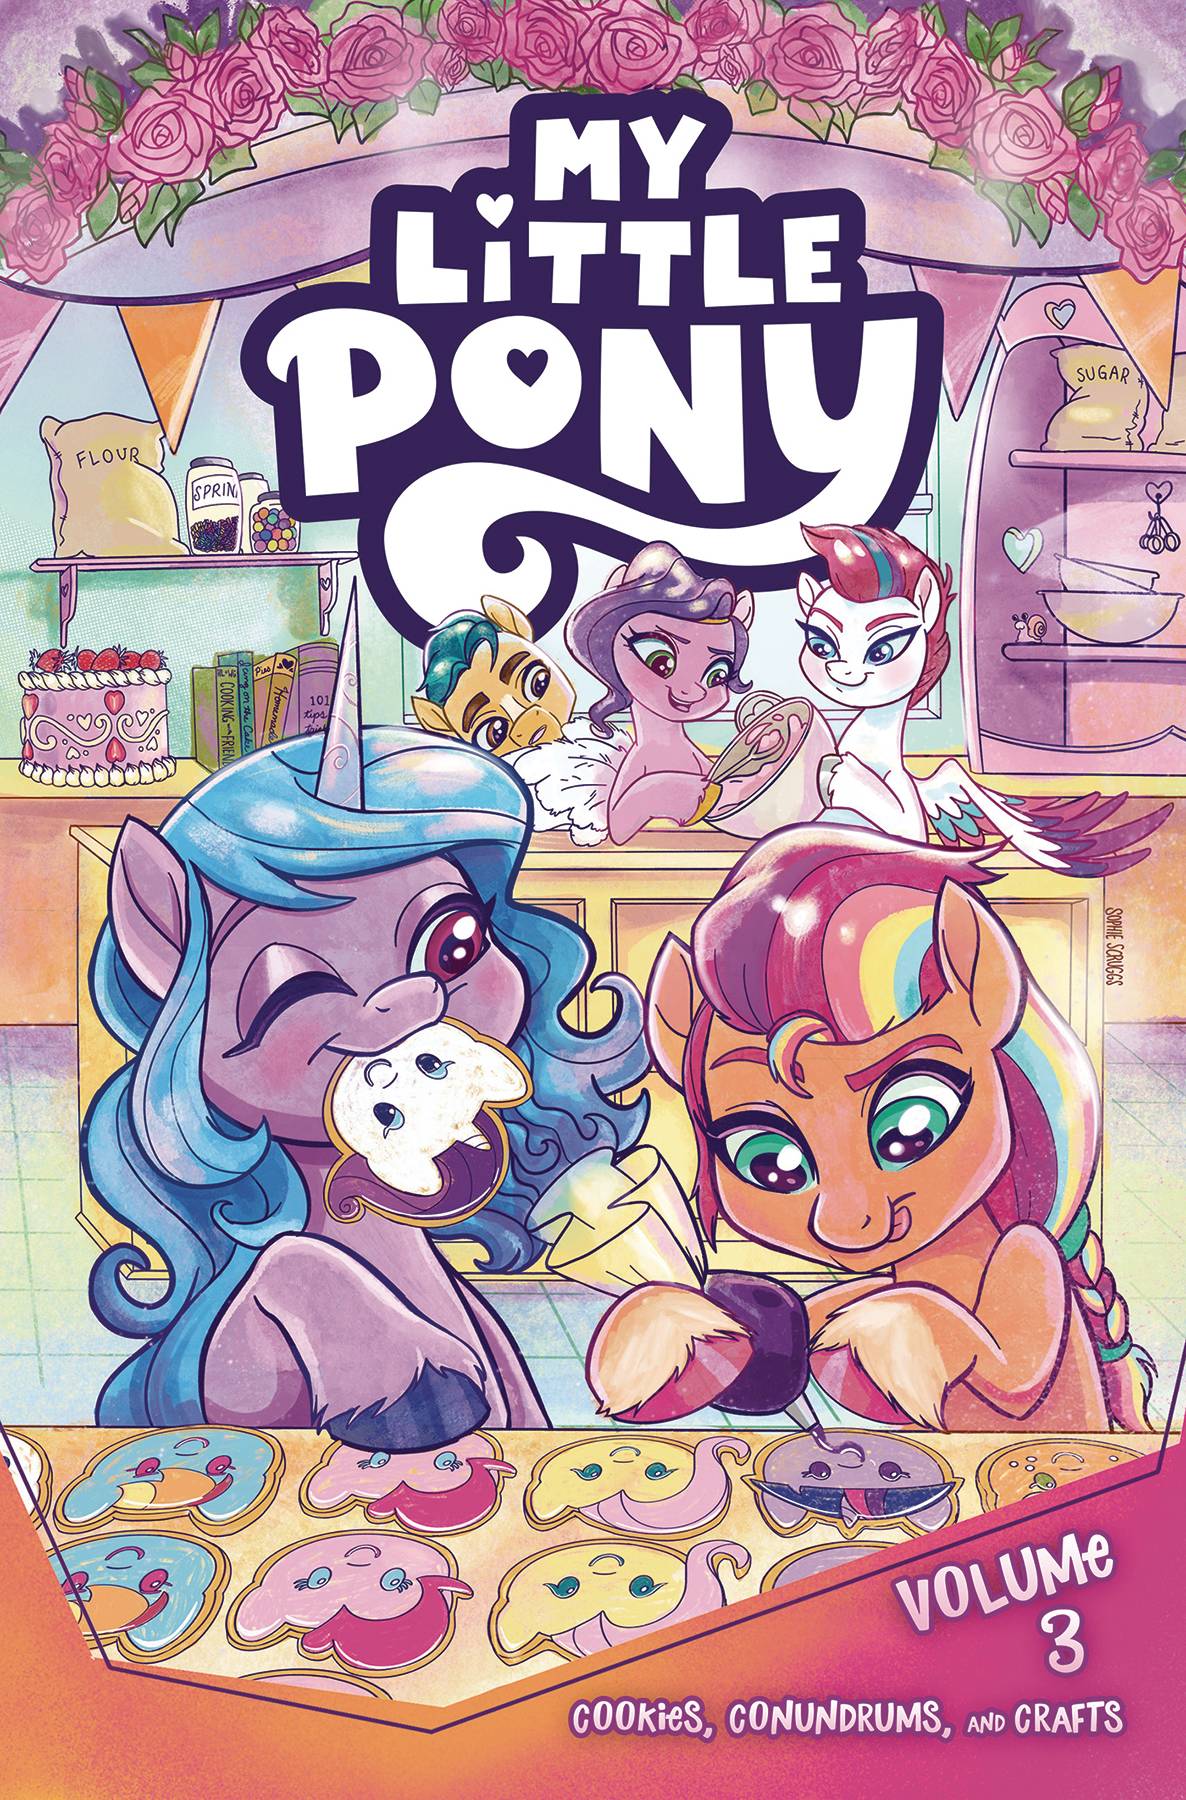 MY LITTLE PONY VOL 03 COOKIES CONUNDRUMS & CRAFTS (RES)